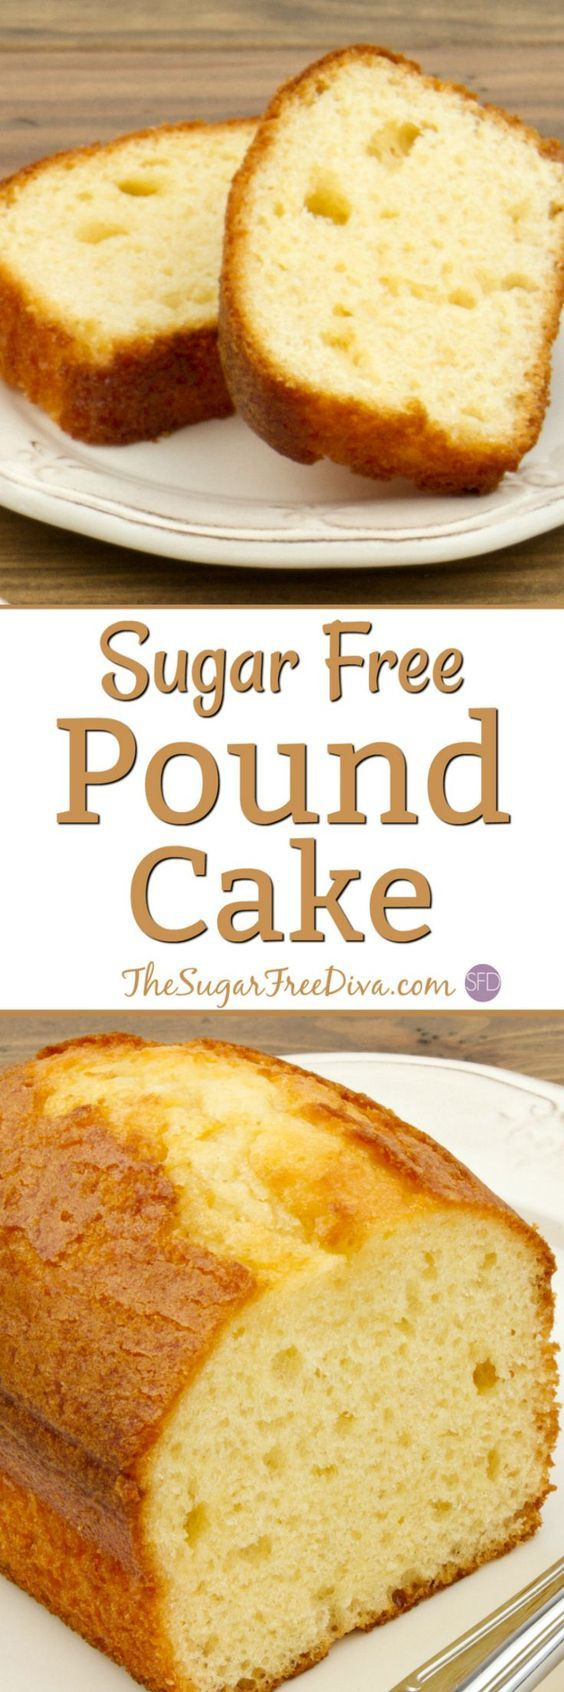 Diabetic Pound Cake
 A favorite cake recipe for many Pound cake only this